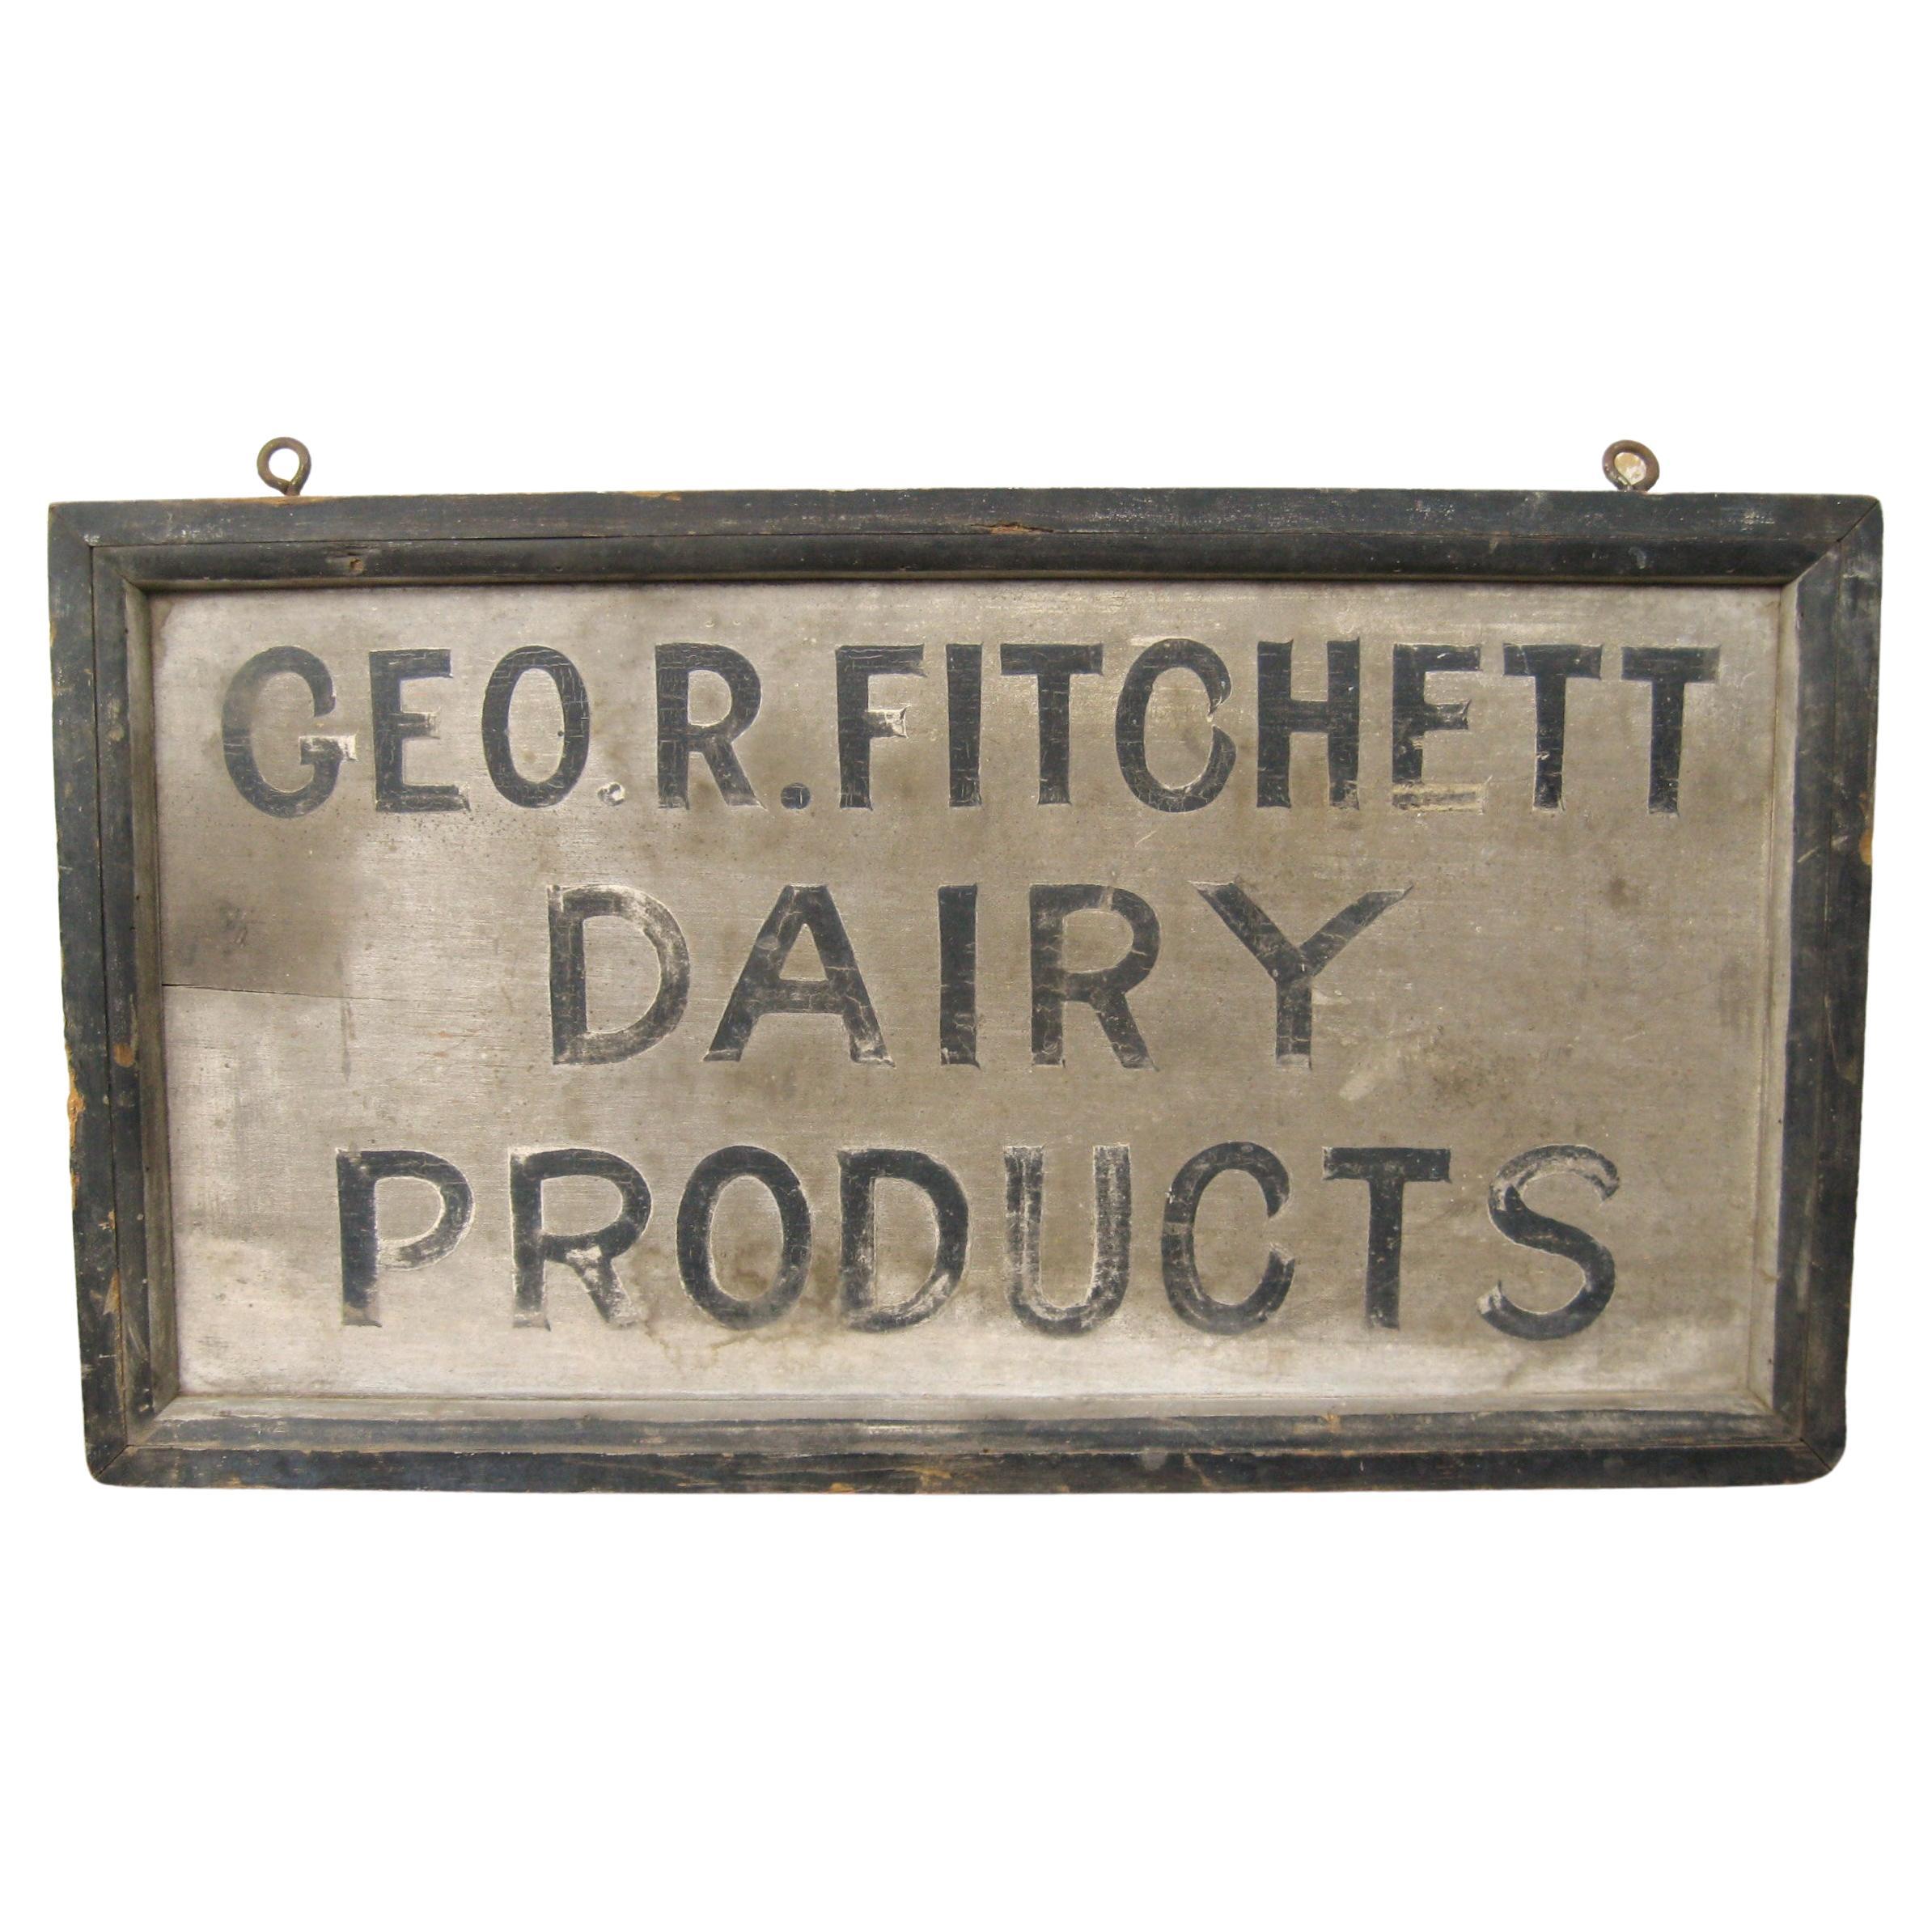  Dairy Products Trade Sign Geo Fitchett 1940s For Sale